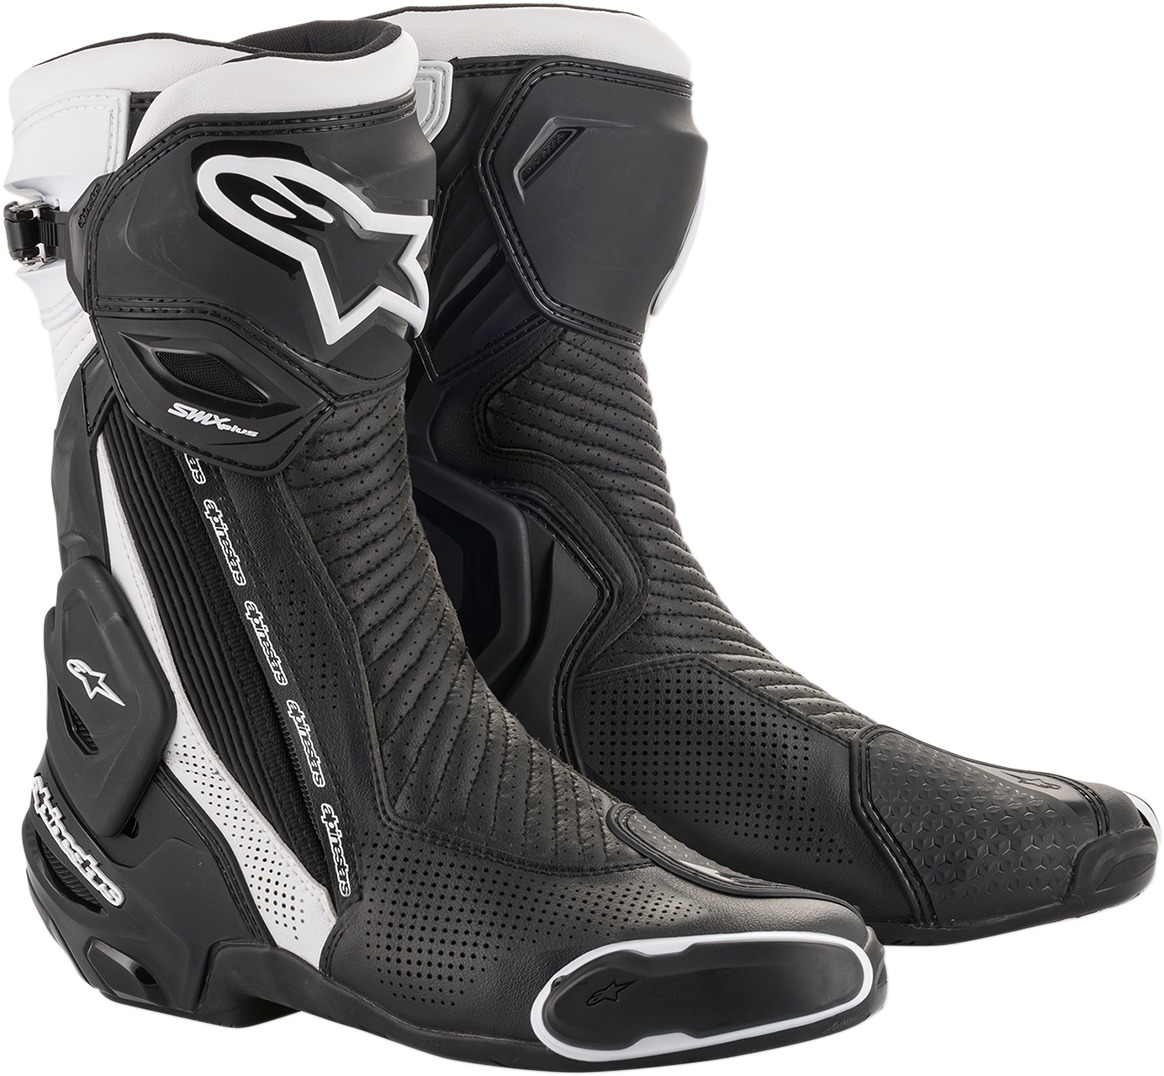 SMX Plus Street Riding Boots Black/White US 12 - Click Image to Close